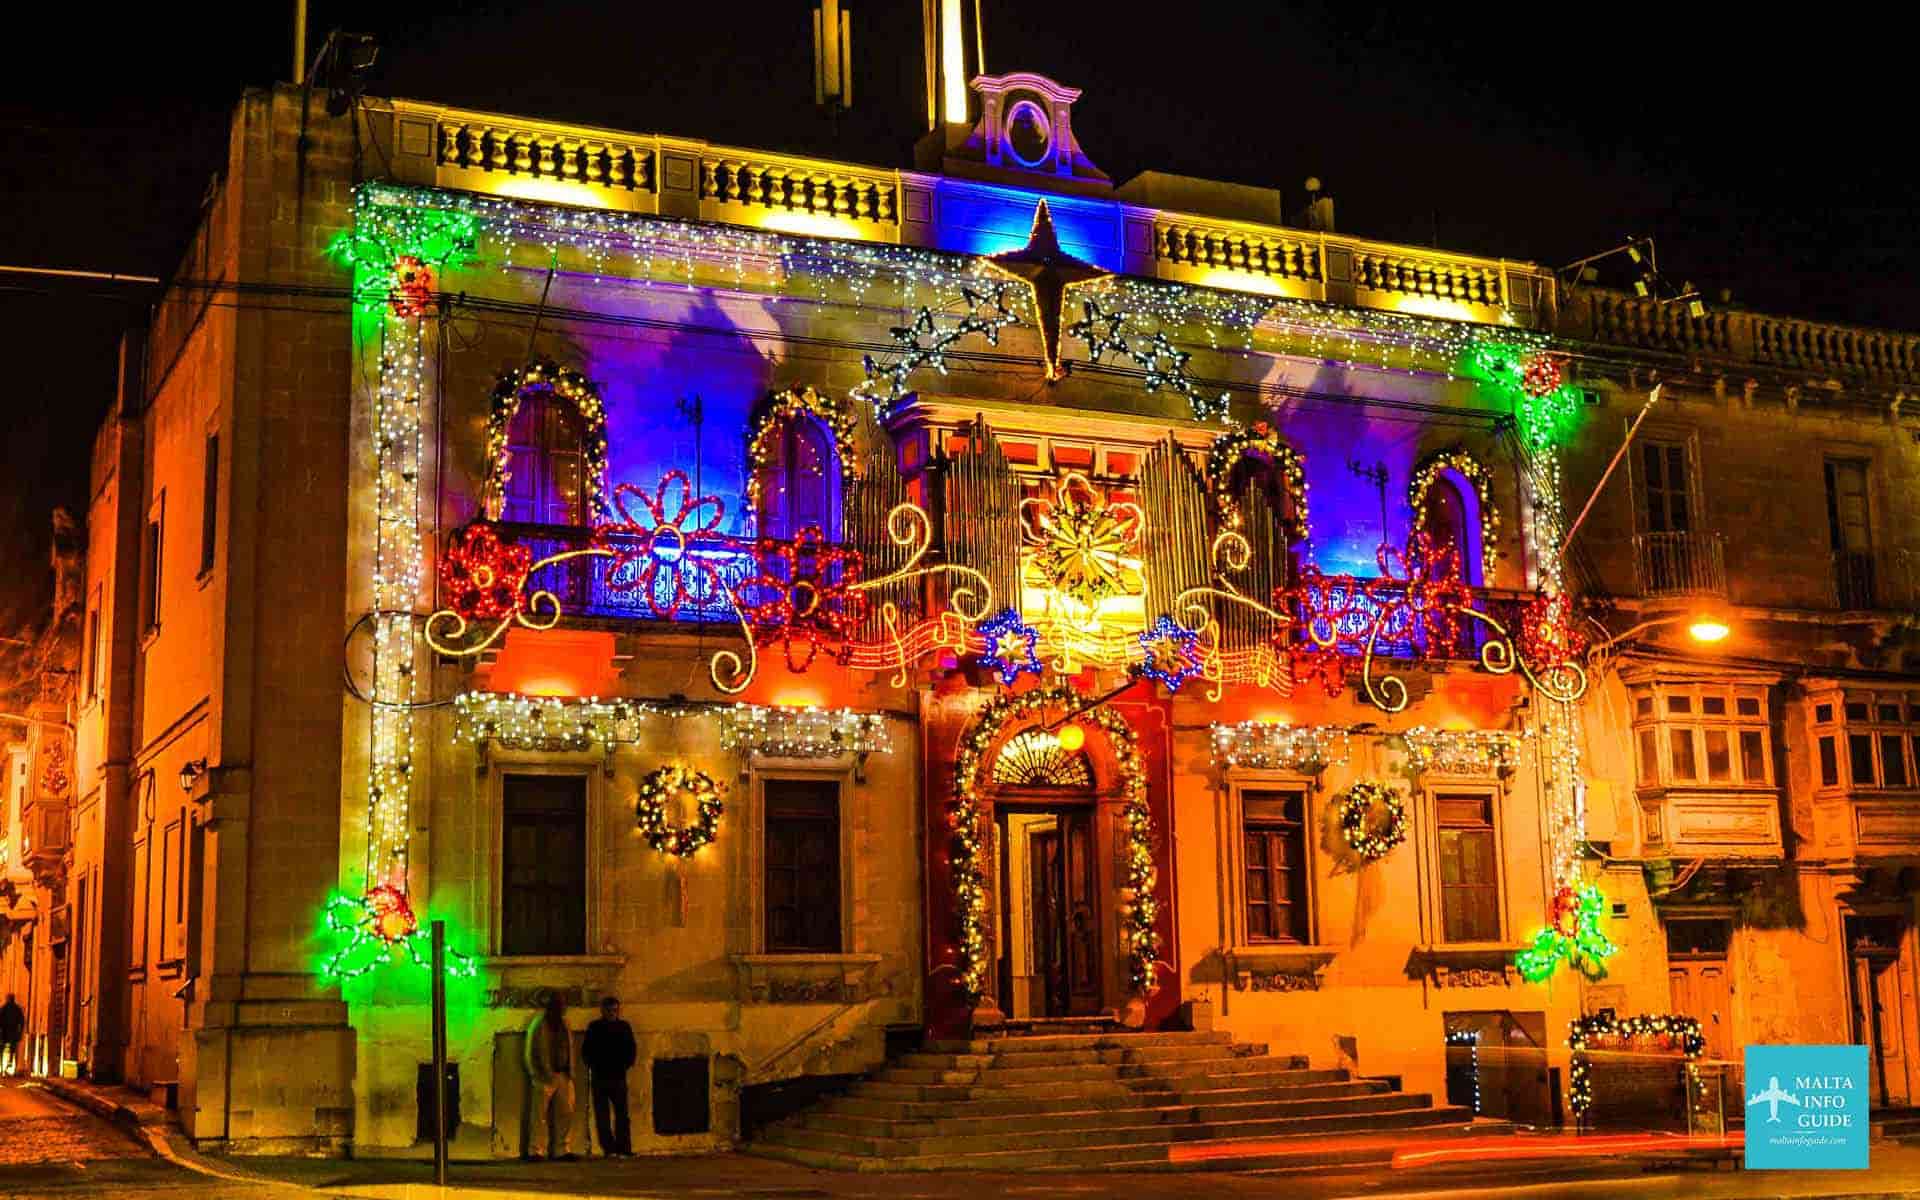 A building in Paola decorated for Christmas.